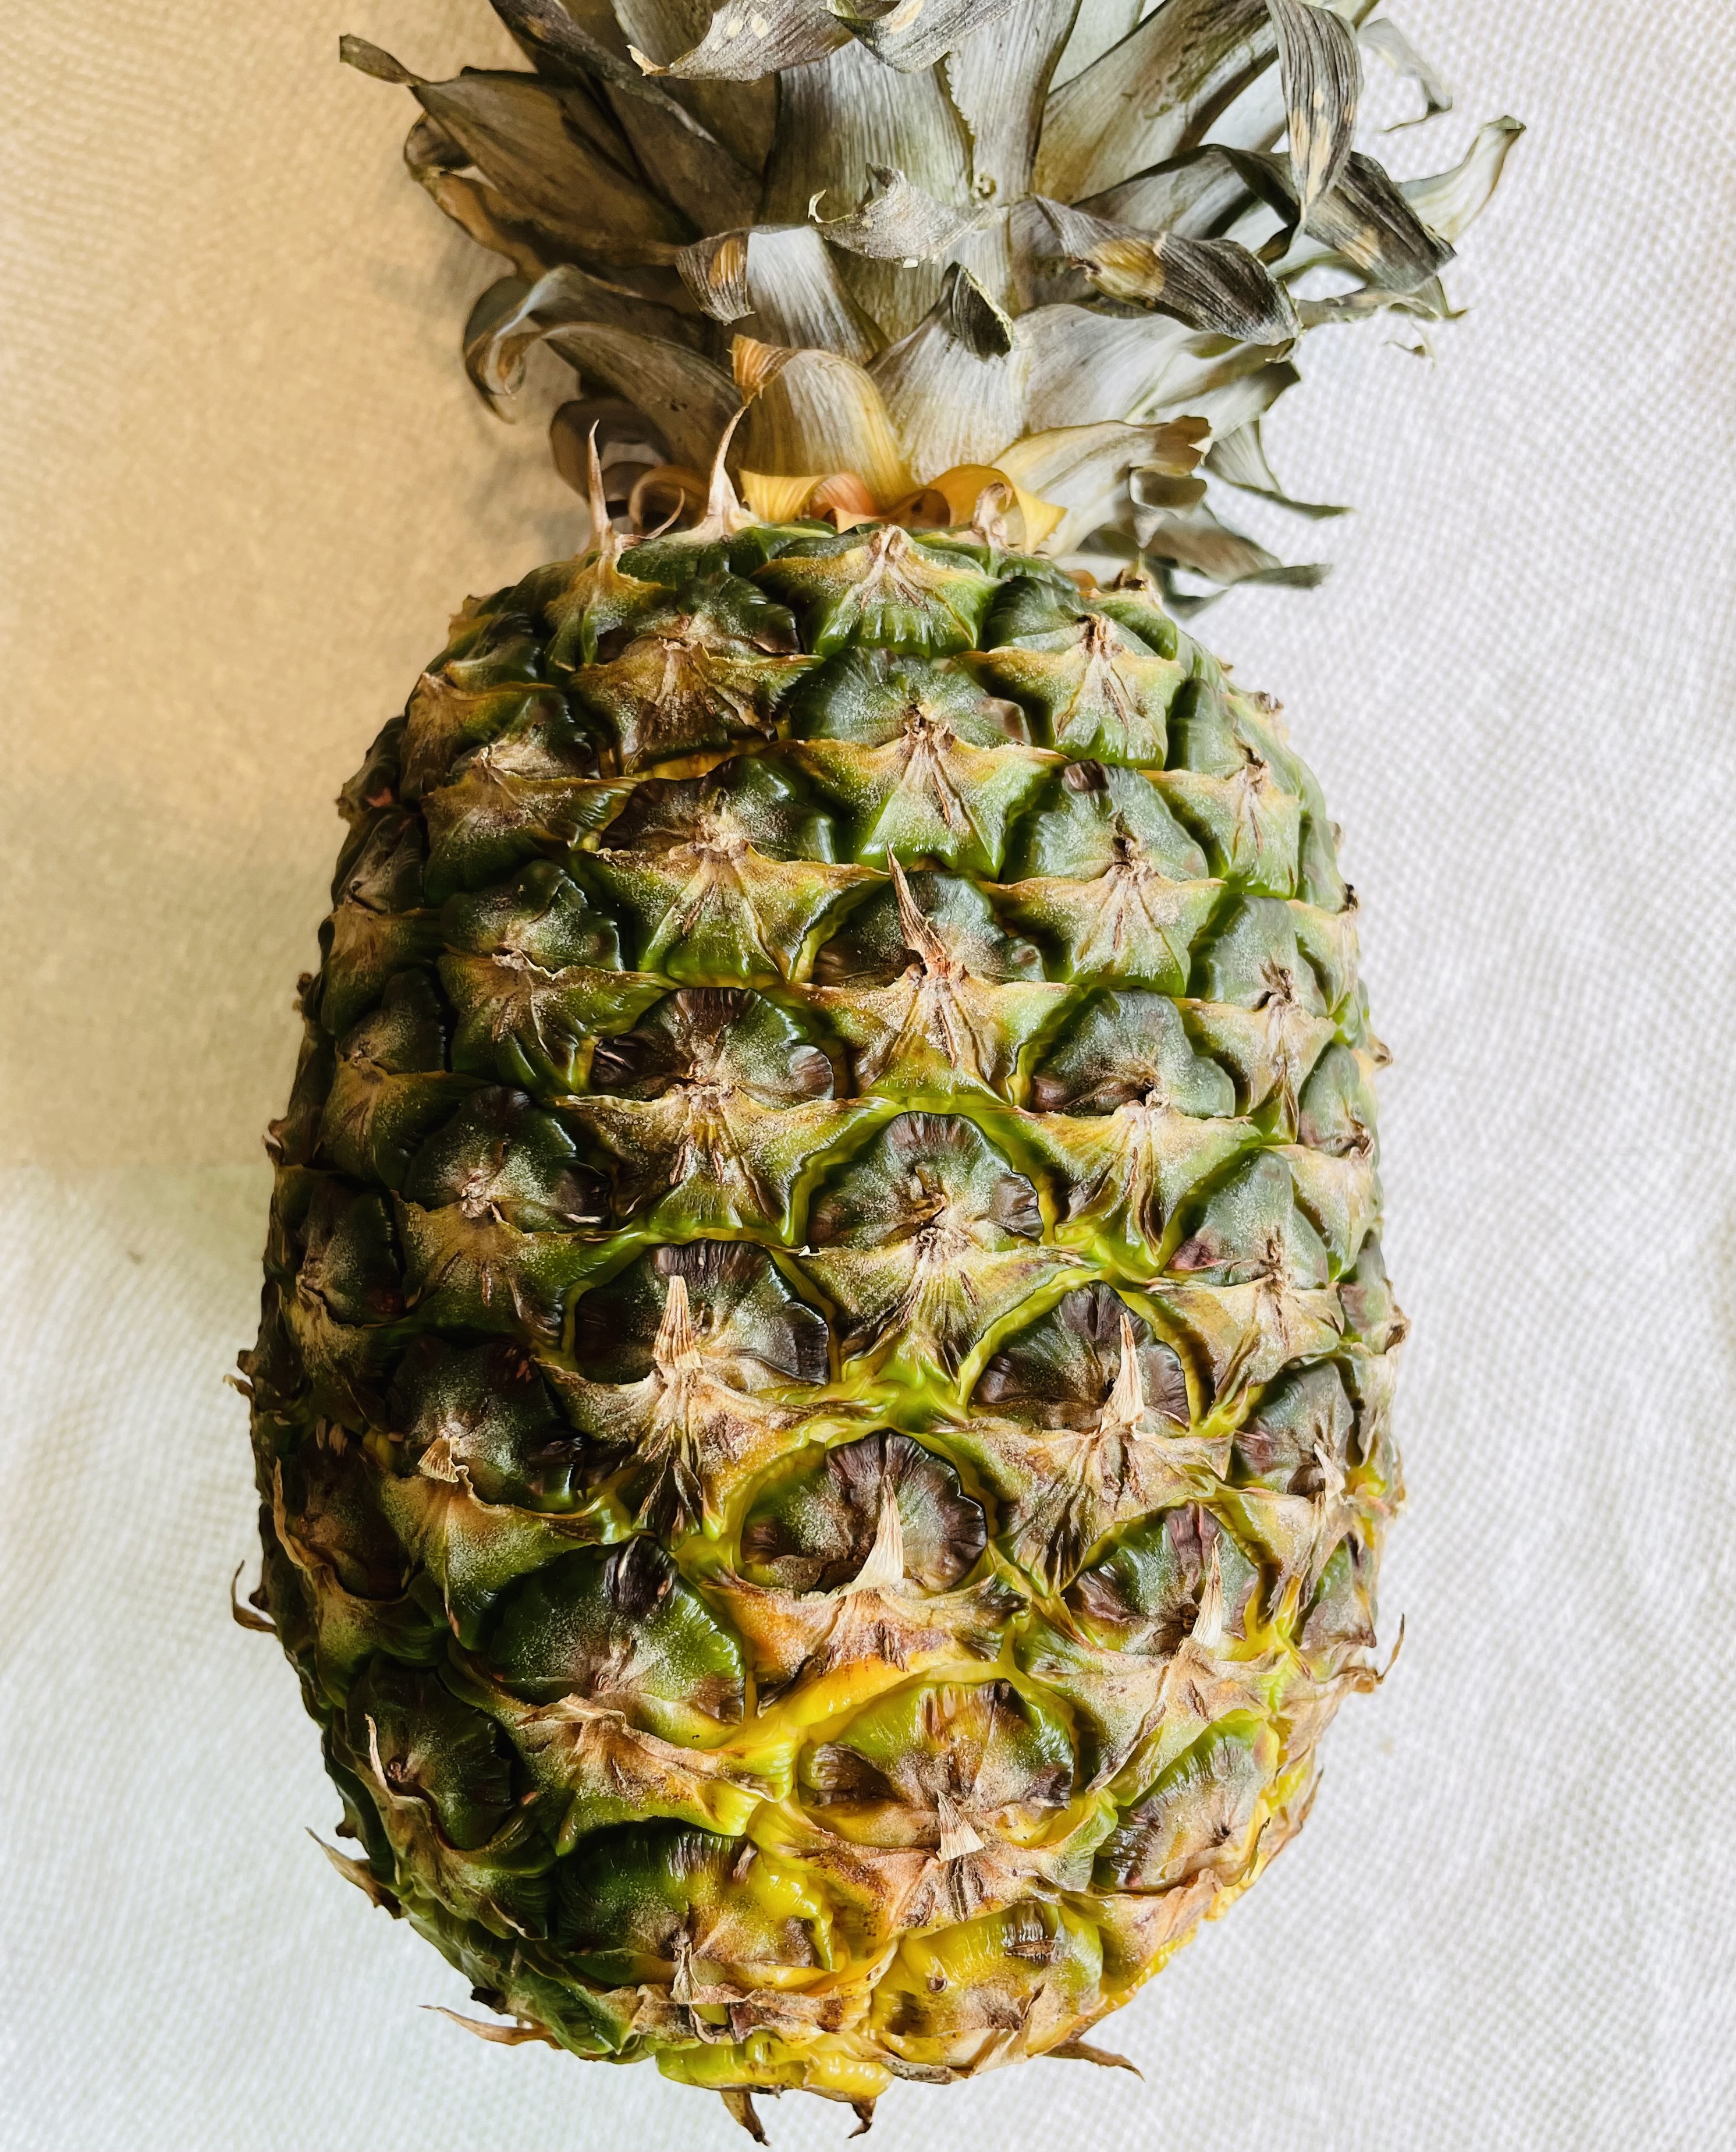 How to select the best pineapples